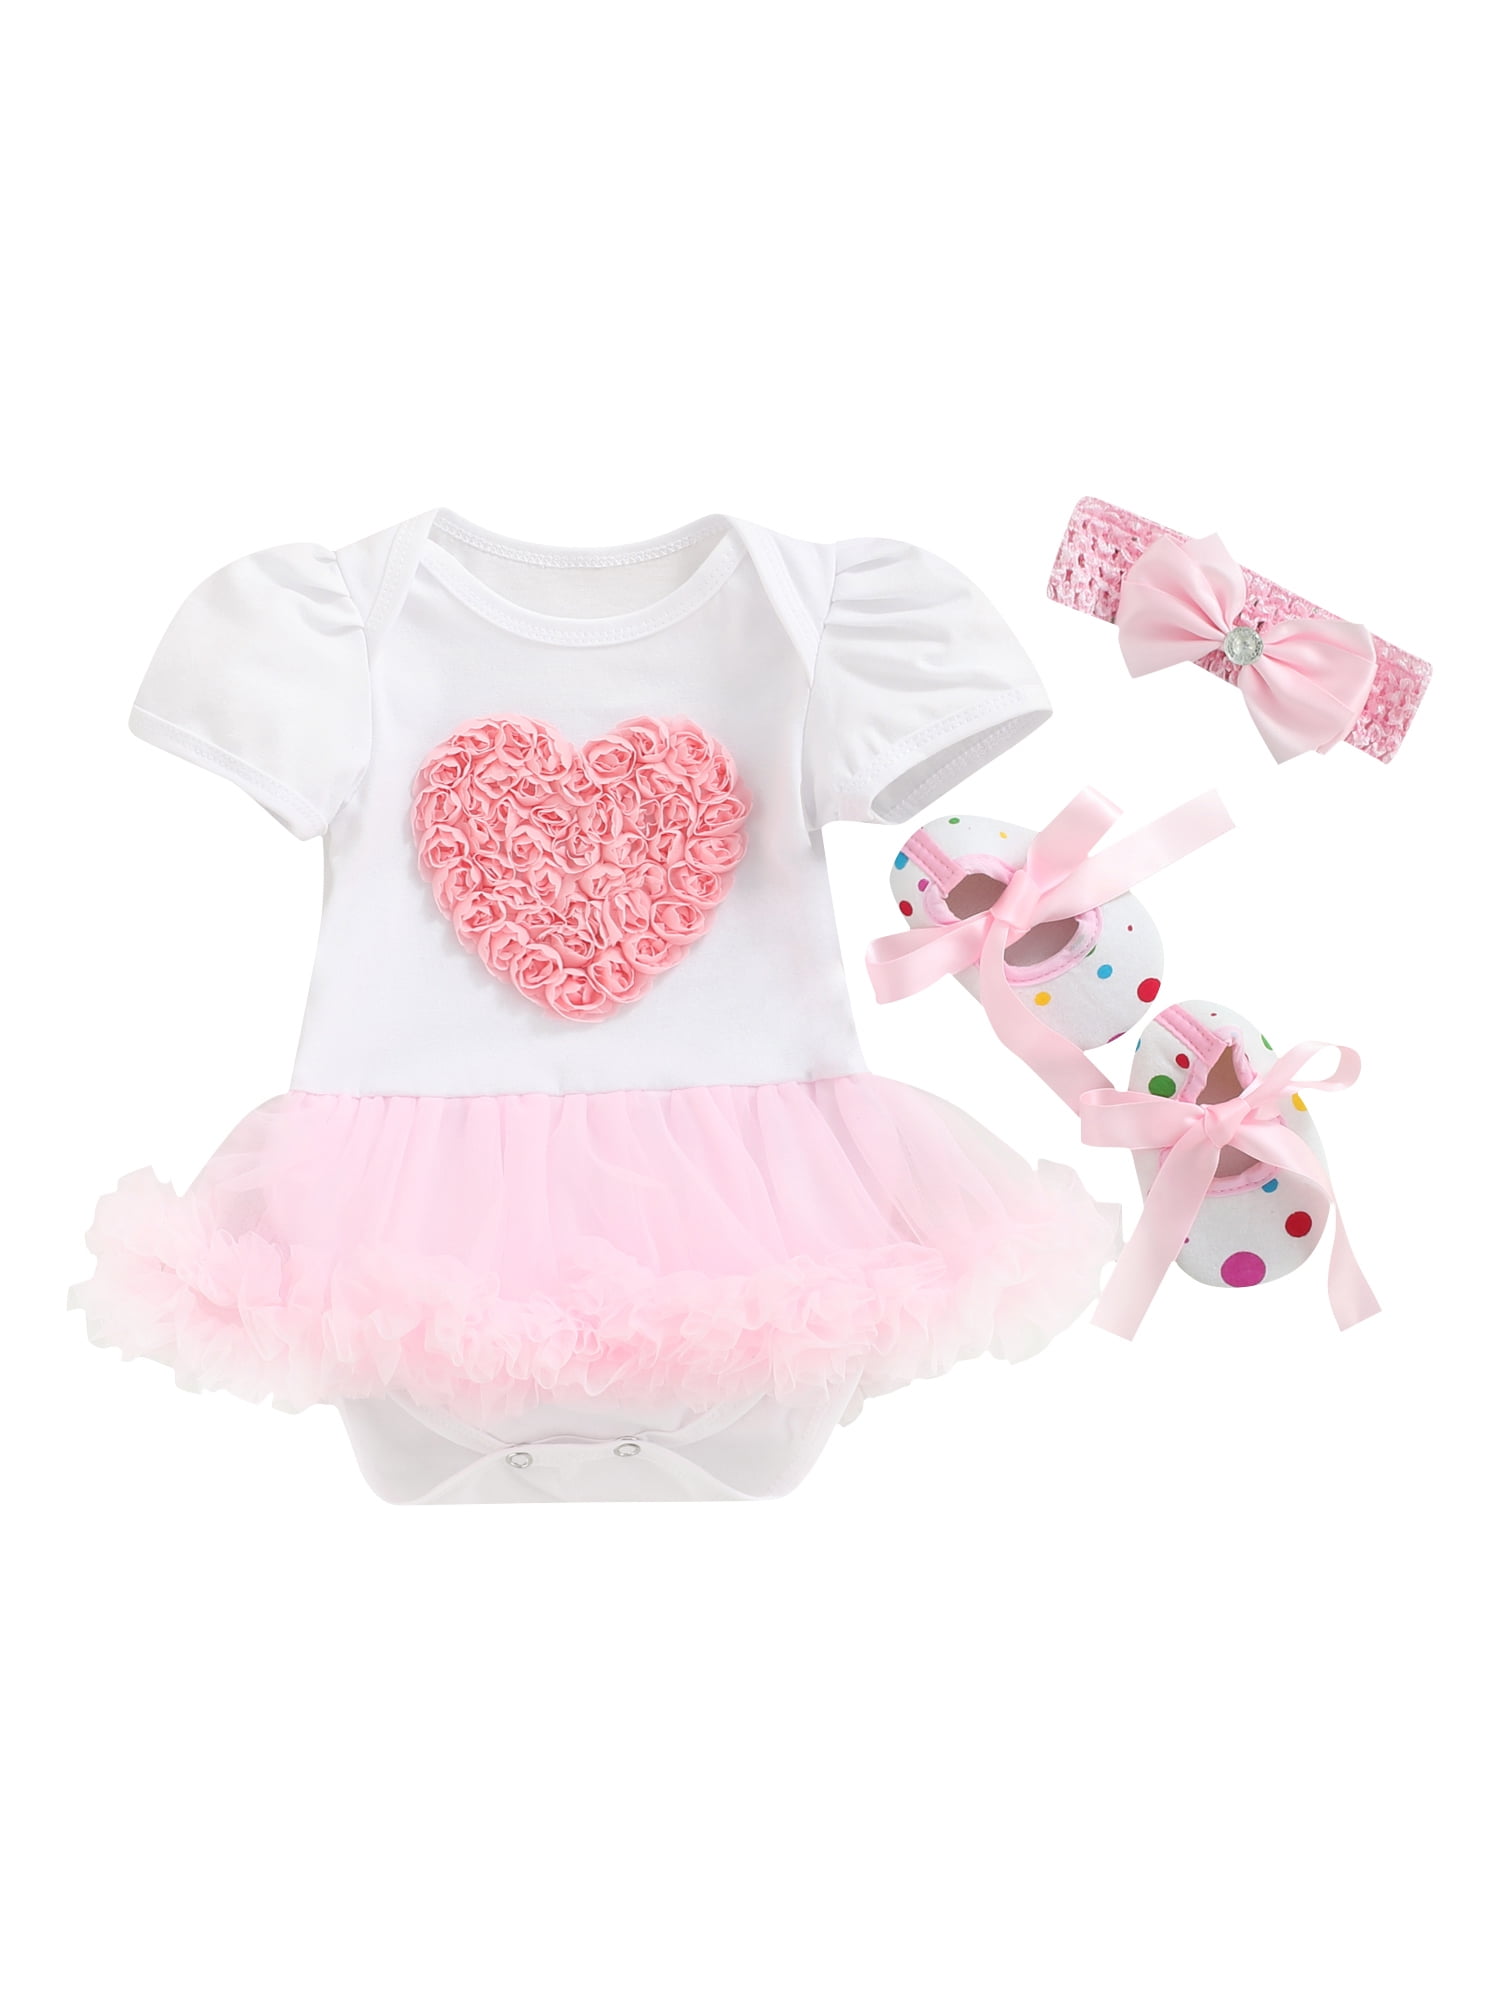 Baby Girls2PCs Hot Pink My First Easter Tutu Dress Headband Outfit Clothes Set 0-2 Years 